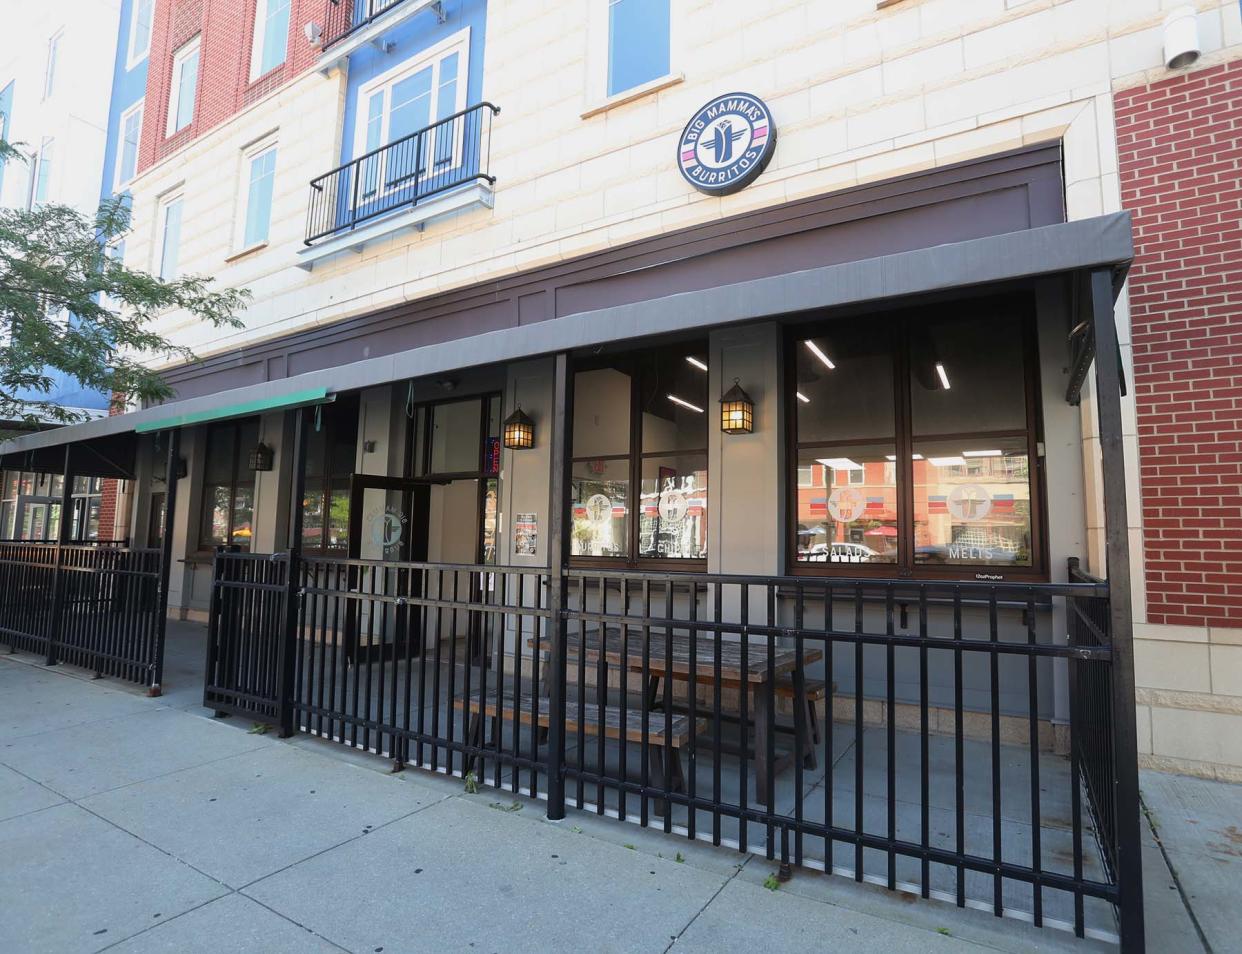 New ownership has taken over at Big Mamma's Burritos on South Main Street in downtown Akron, shown in this June 2022, photo. New owners Wil Brown and Elizabeth Hernandez reopened the restaurant Friday after it closed in November.